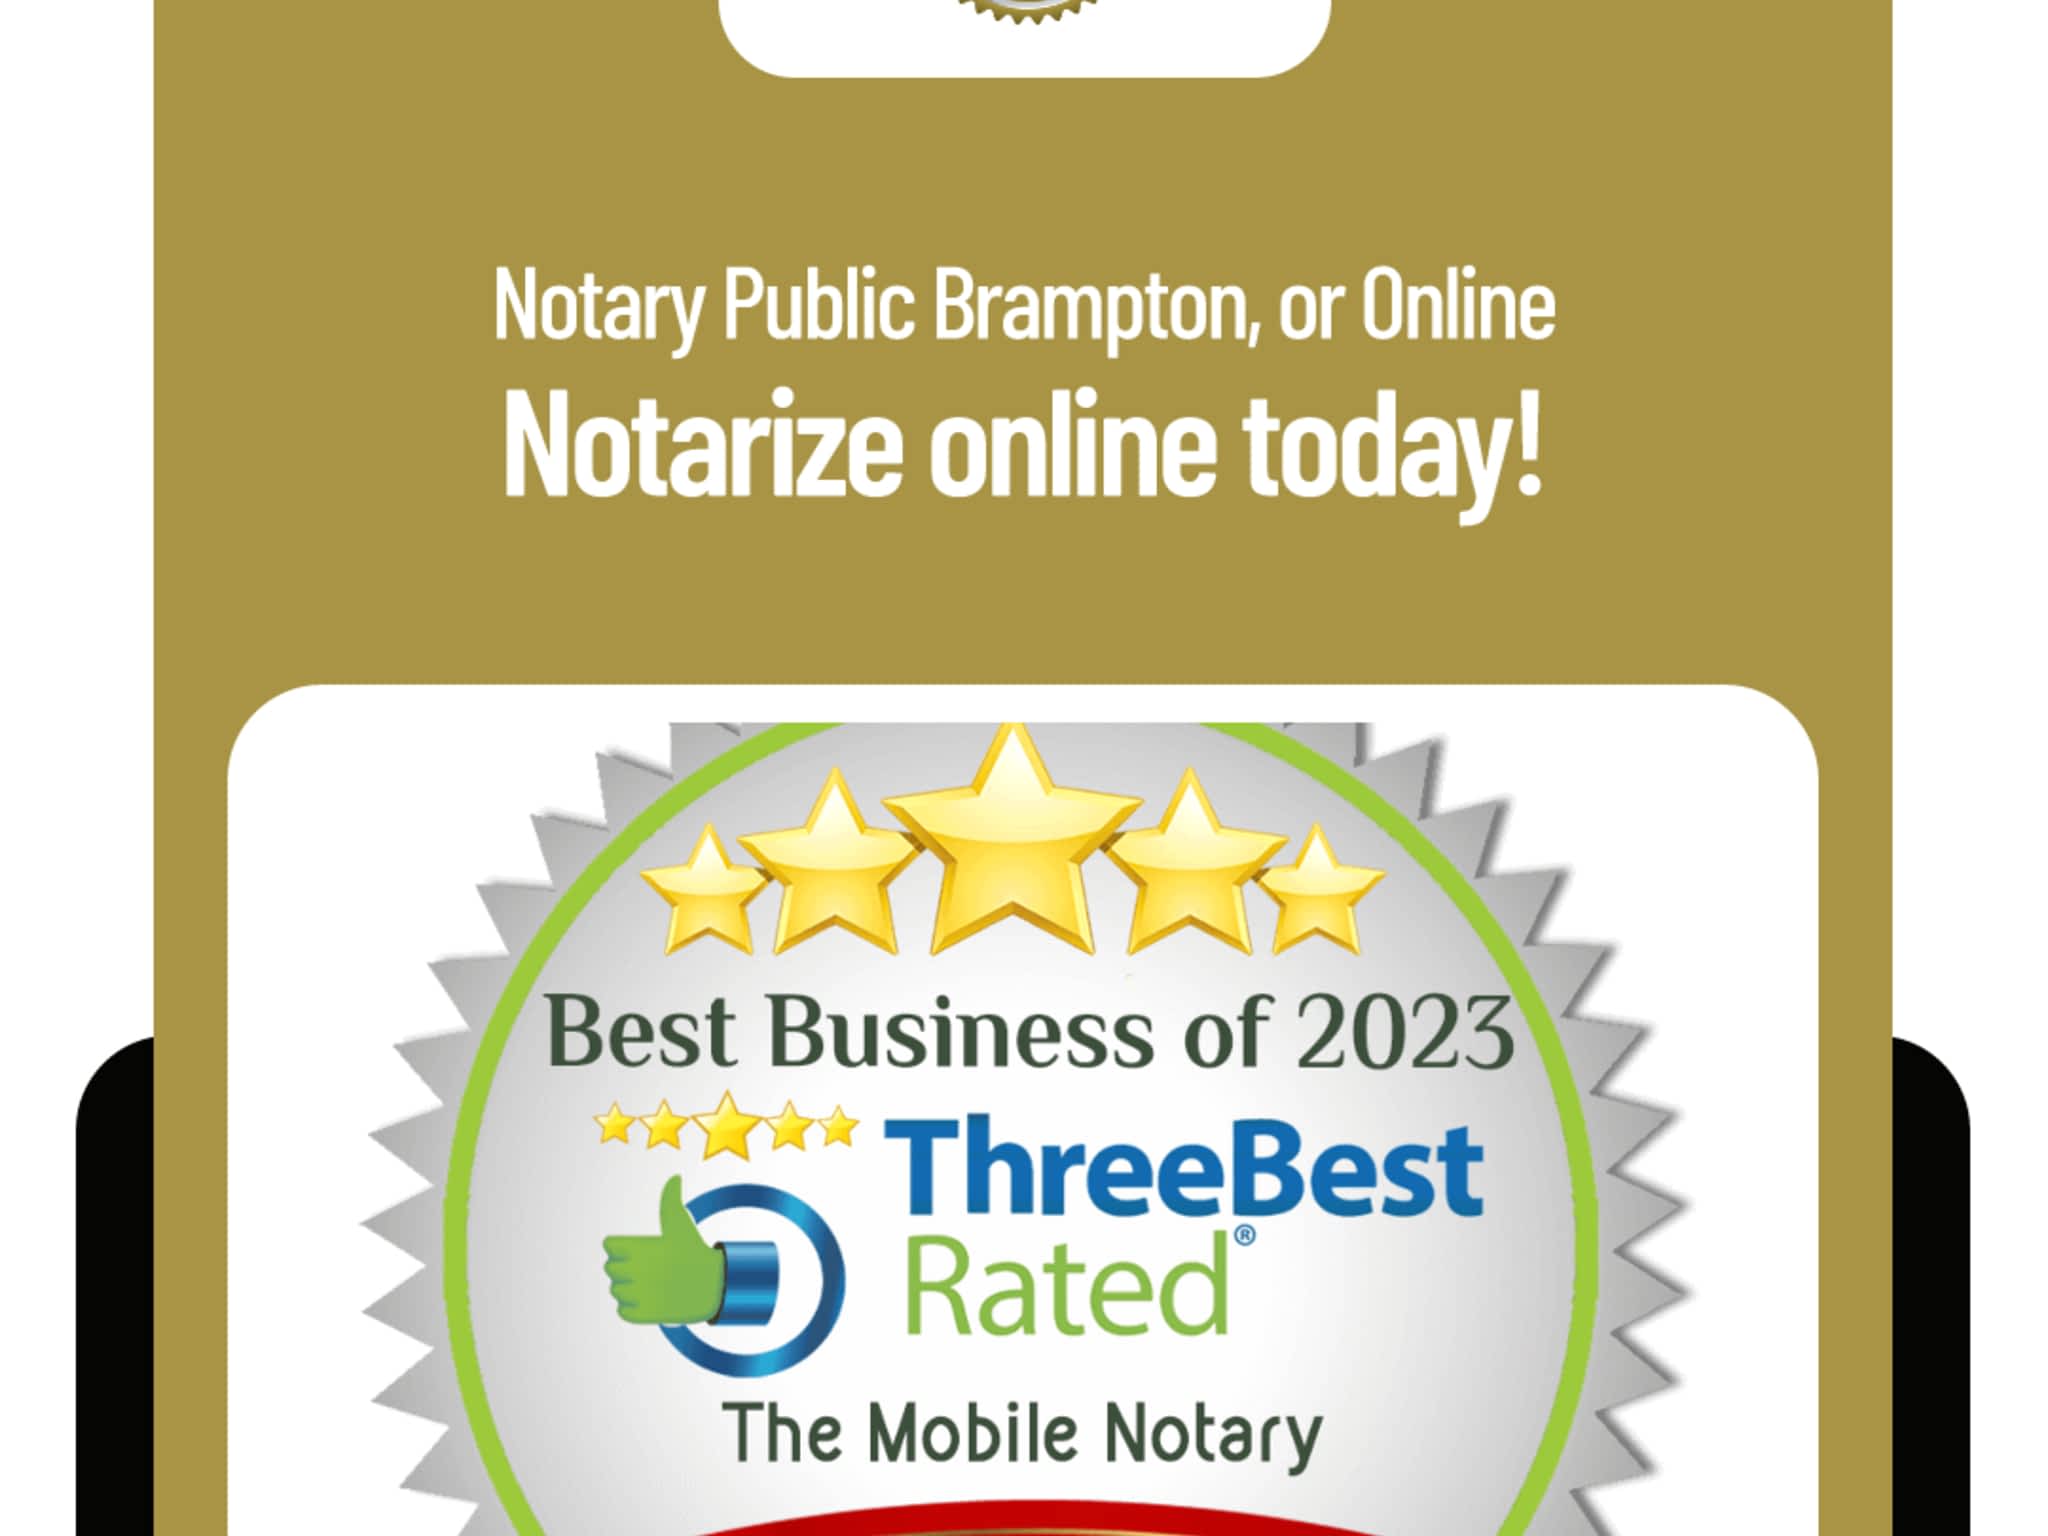 photo The Mobile Notary